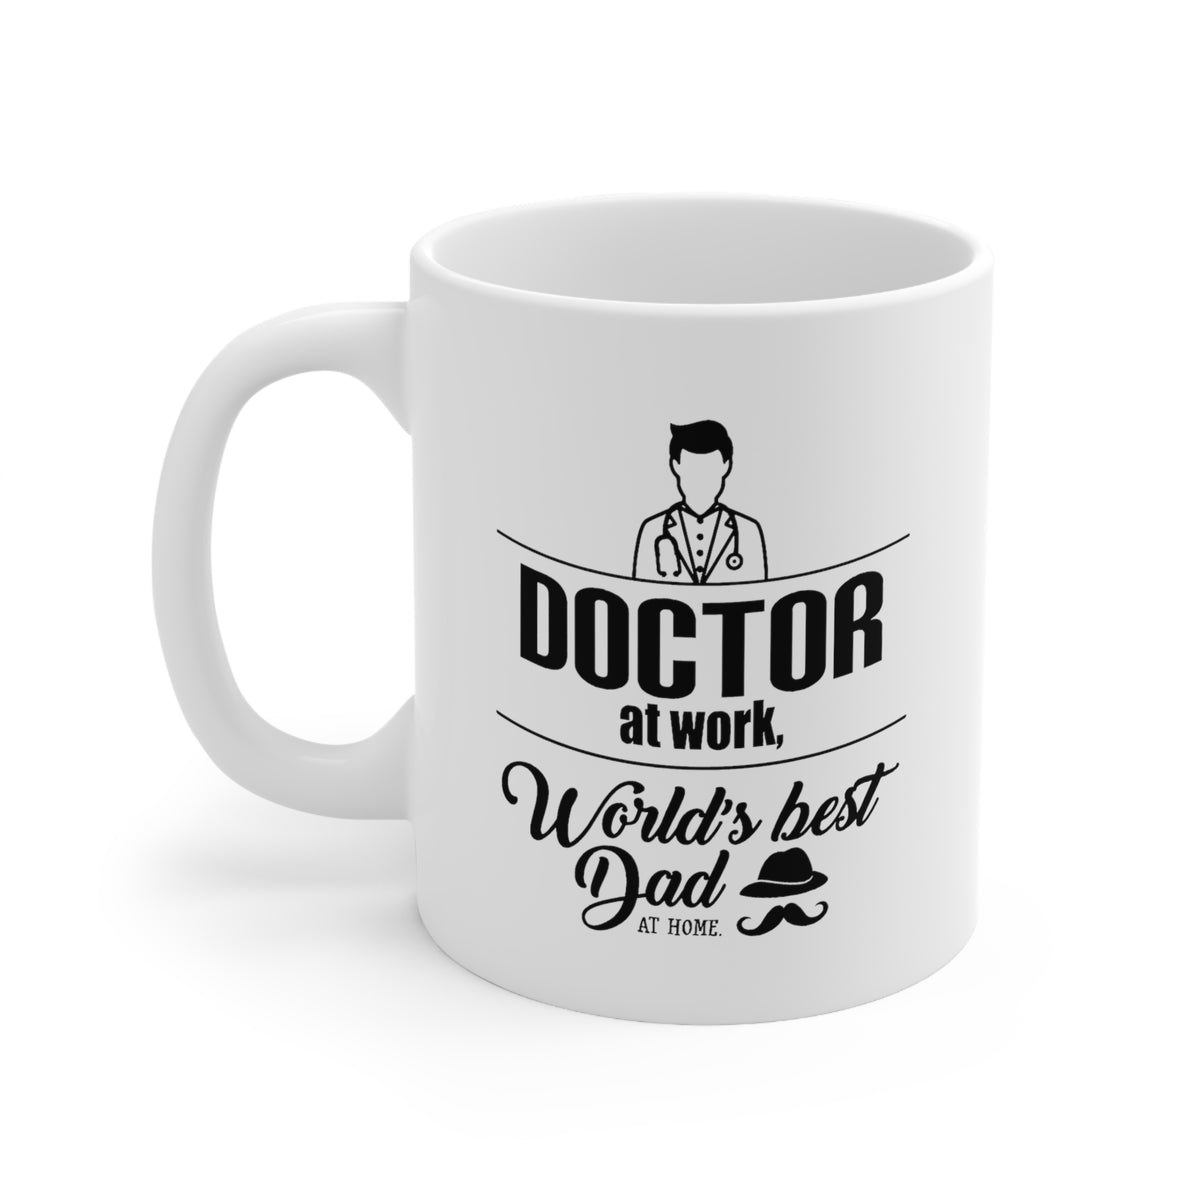 Doctor At Work, World’s Best Dad At Home - Father's Day Coffee Mug For Doctor